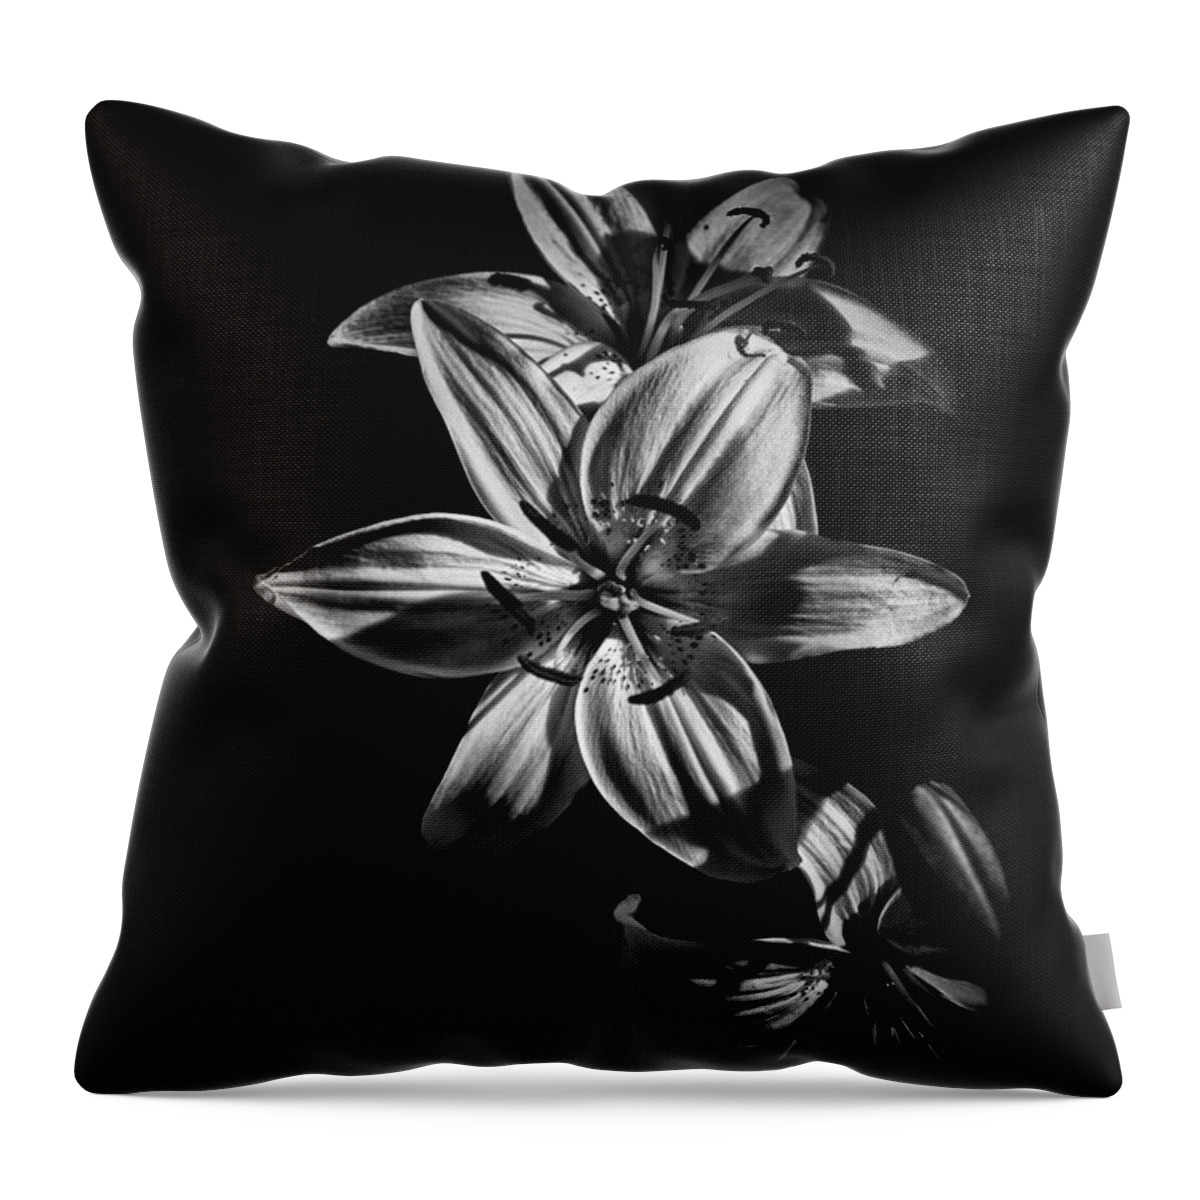 Abstract Throw Pillow featuring the photograph Backyard Flowers In Black And White 9 by Brian Carson